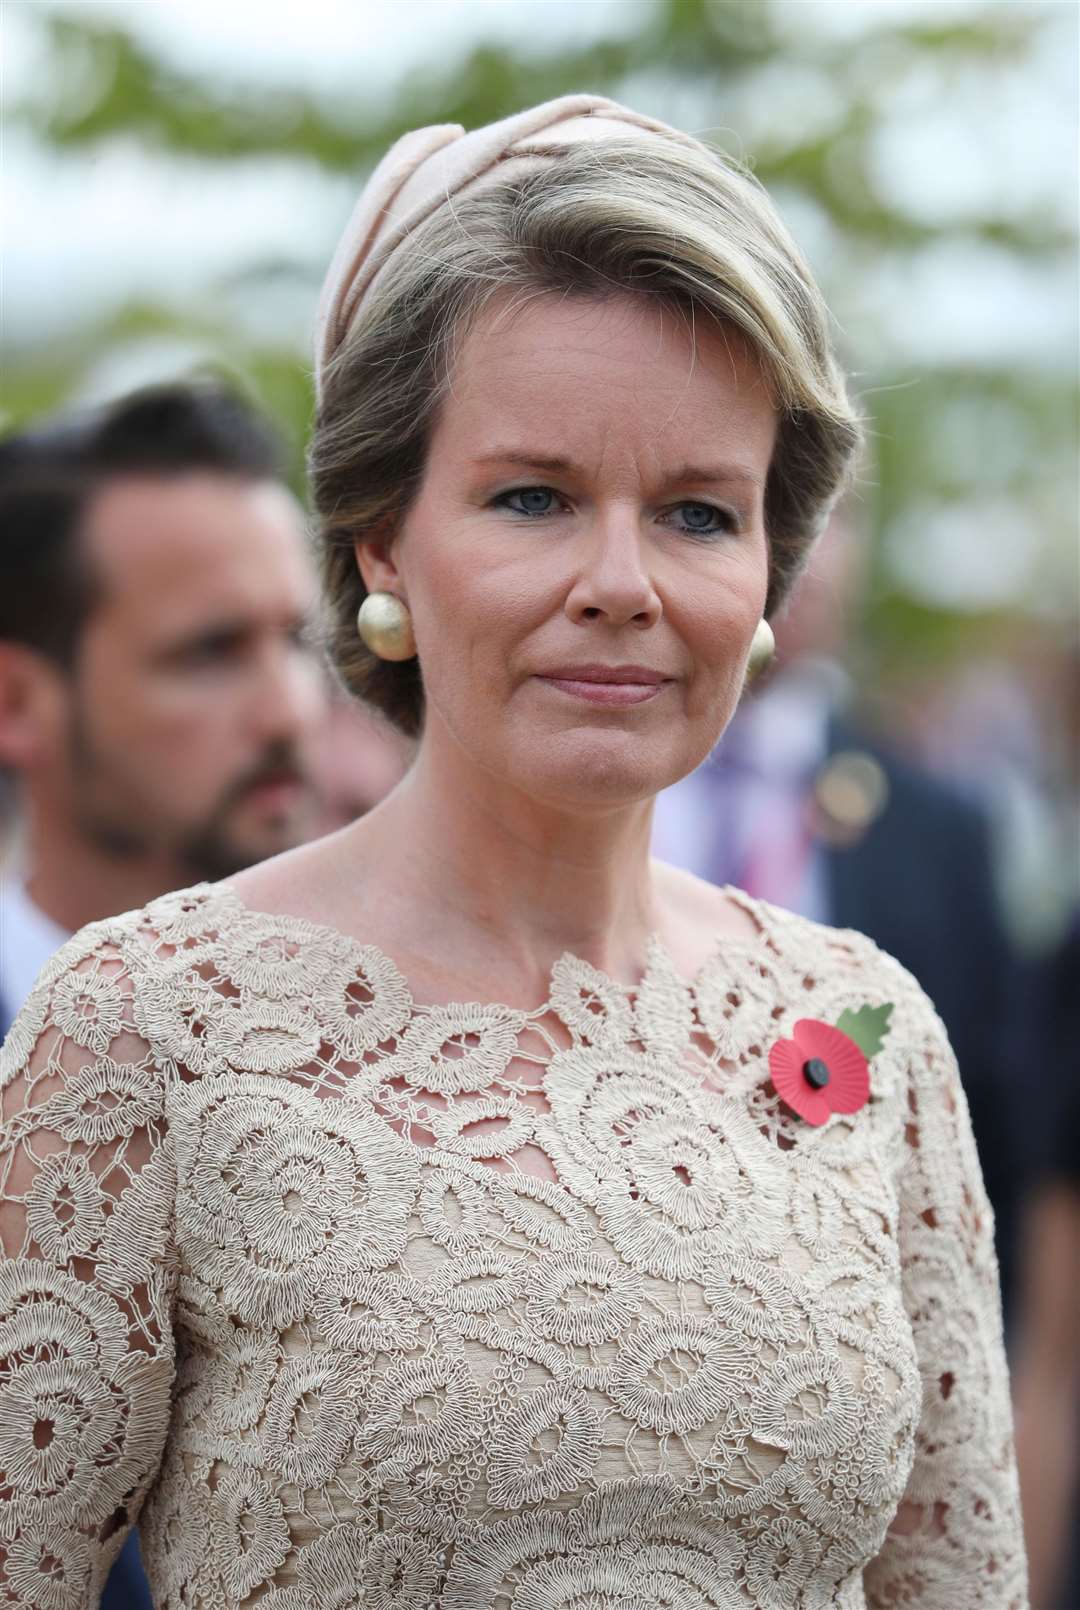 Queen Mathilde of Belgium attended the event at Buckingham Palace (Andrew Matthews/PA)